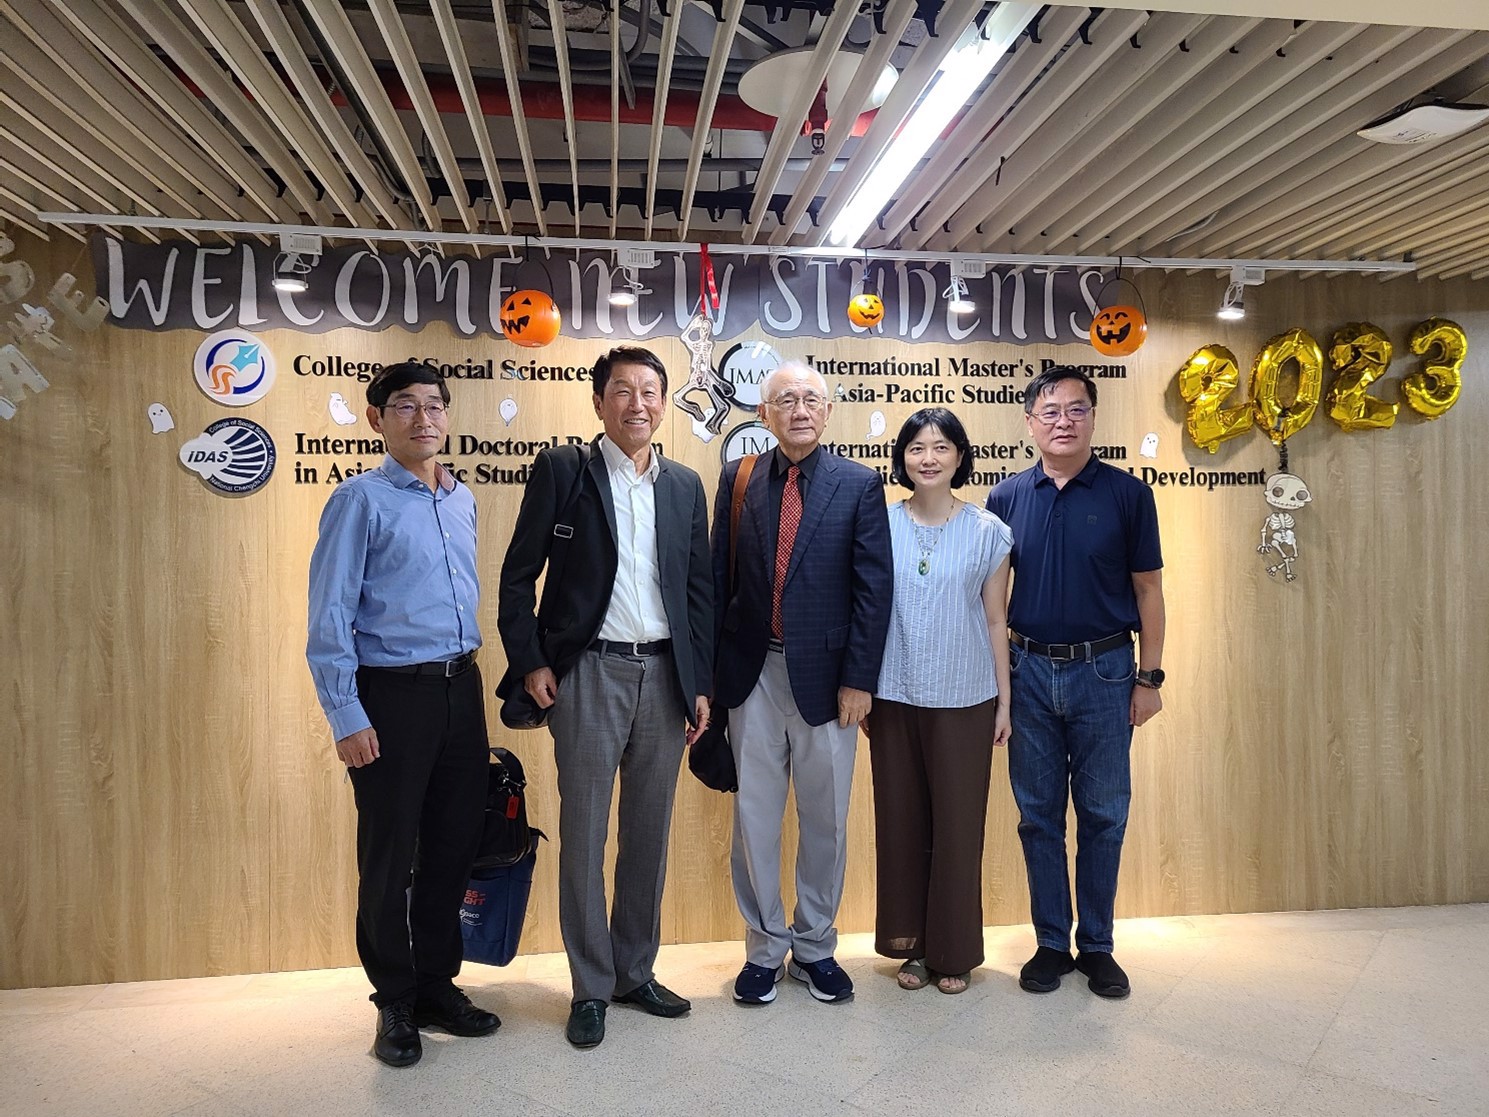 From left to right Adjunct Assistant Professor of IDAS, Dr. Li-Chung Yuan; Adjunct Professor of IDAS, Admiral Hsi-Min Lee; Ambassador Liang-Jen Chang; Director of IDAS, Dr. Chao-Chi Lin; Professor of Department of Land and Economics, Dr. Fang-Shii Ning.（Photo by IDAS）